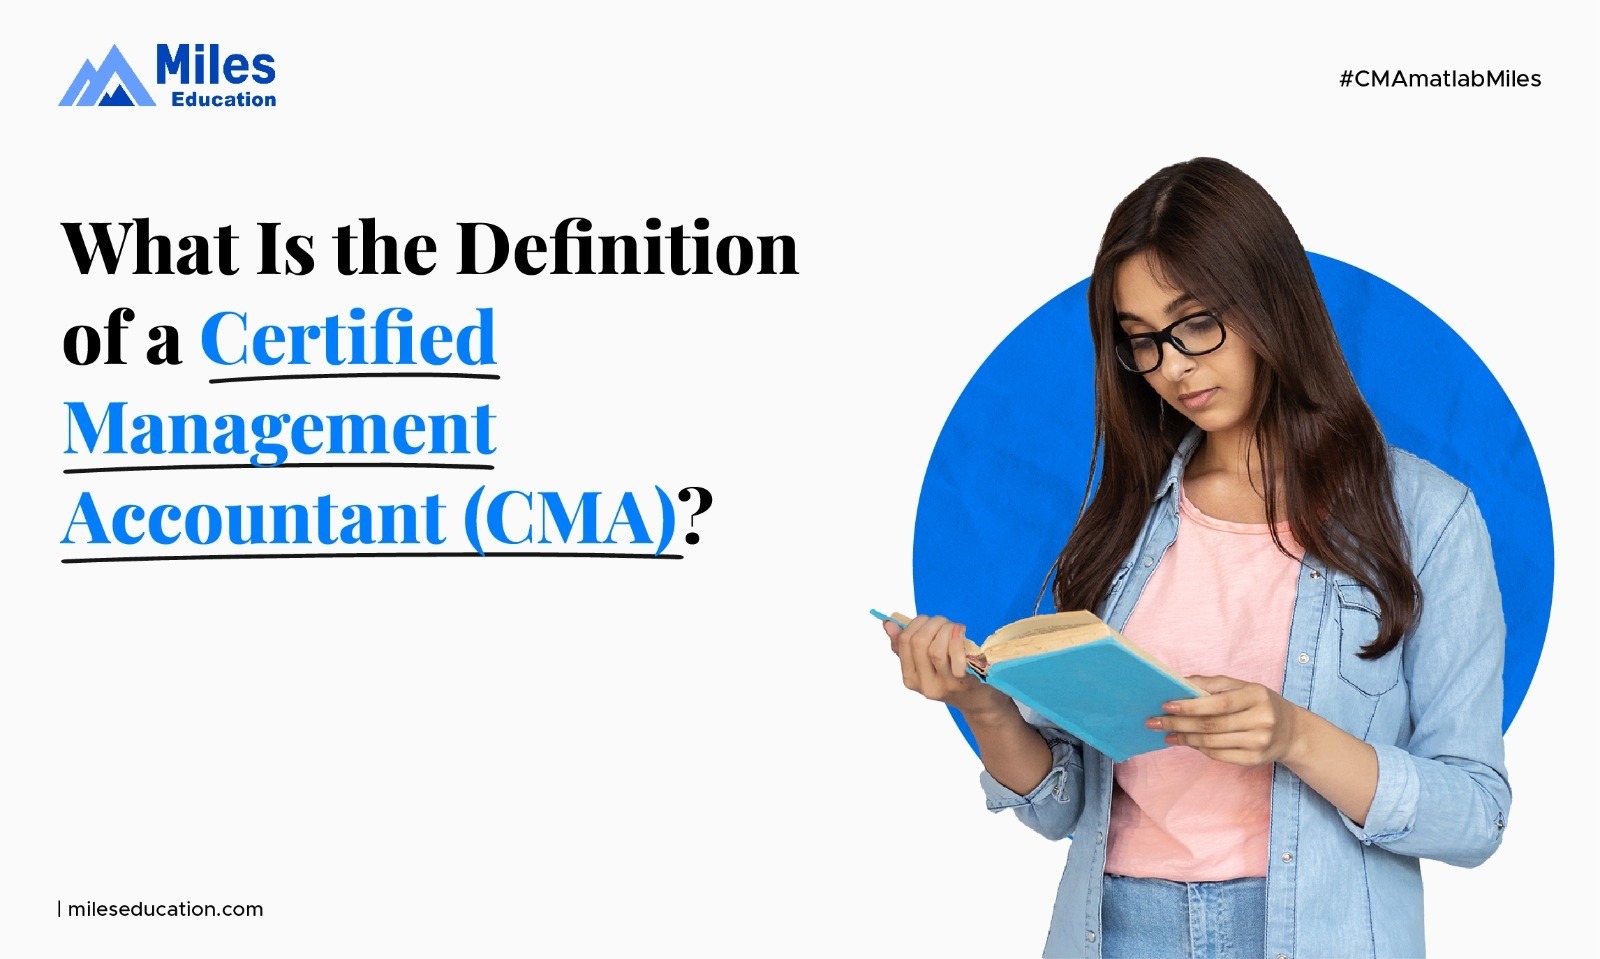 What Is the Definition of a Certified Management Accountant (CMA)?